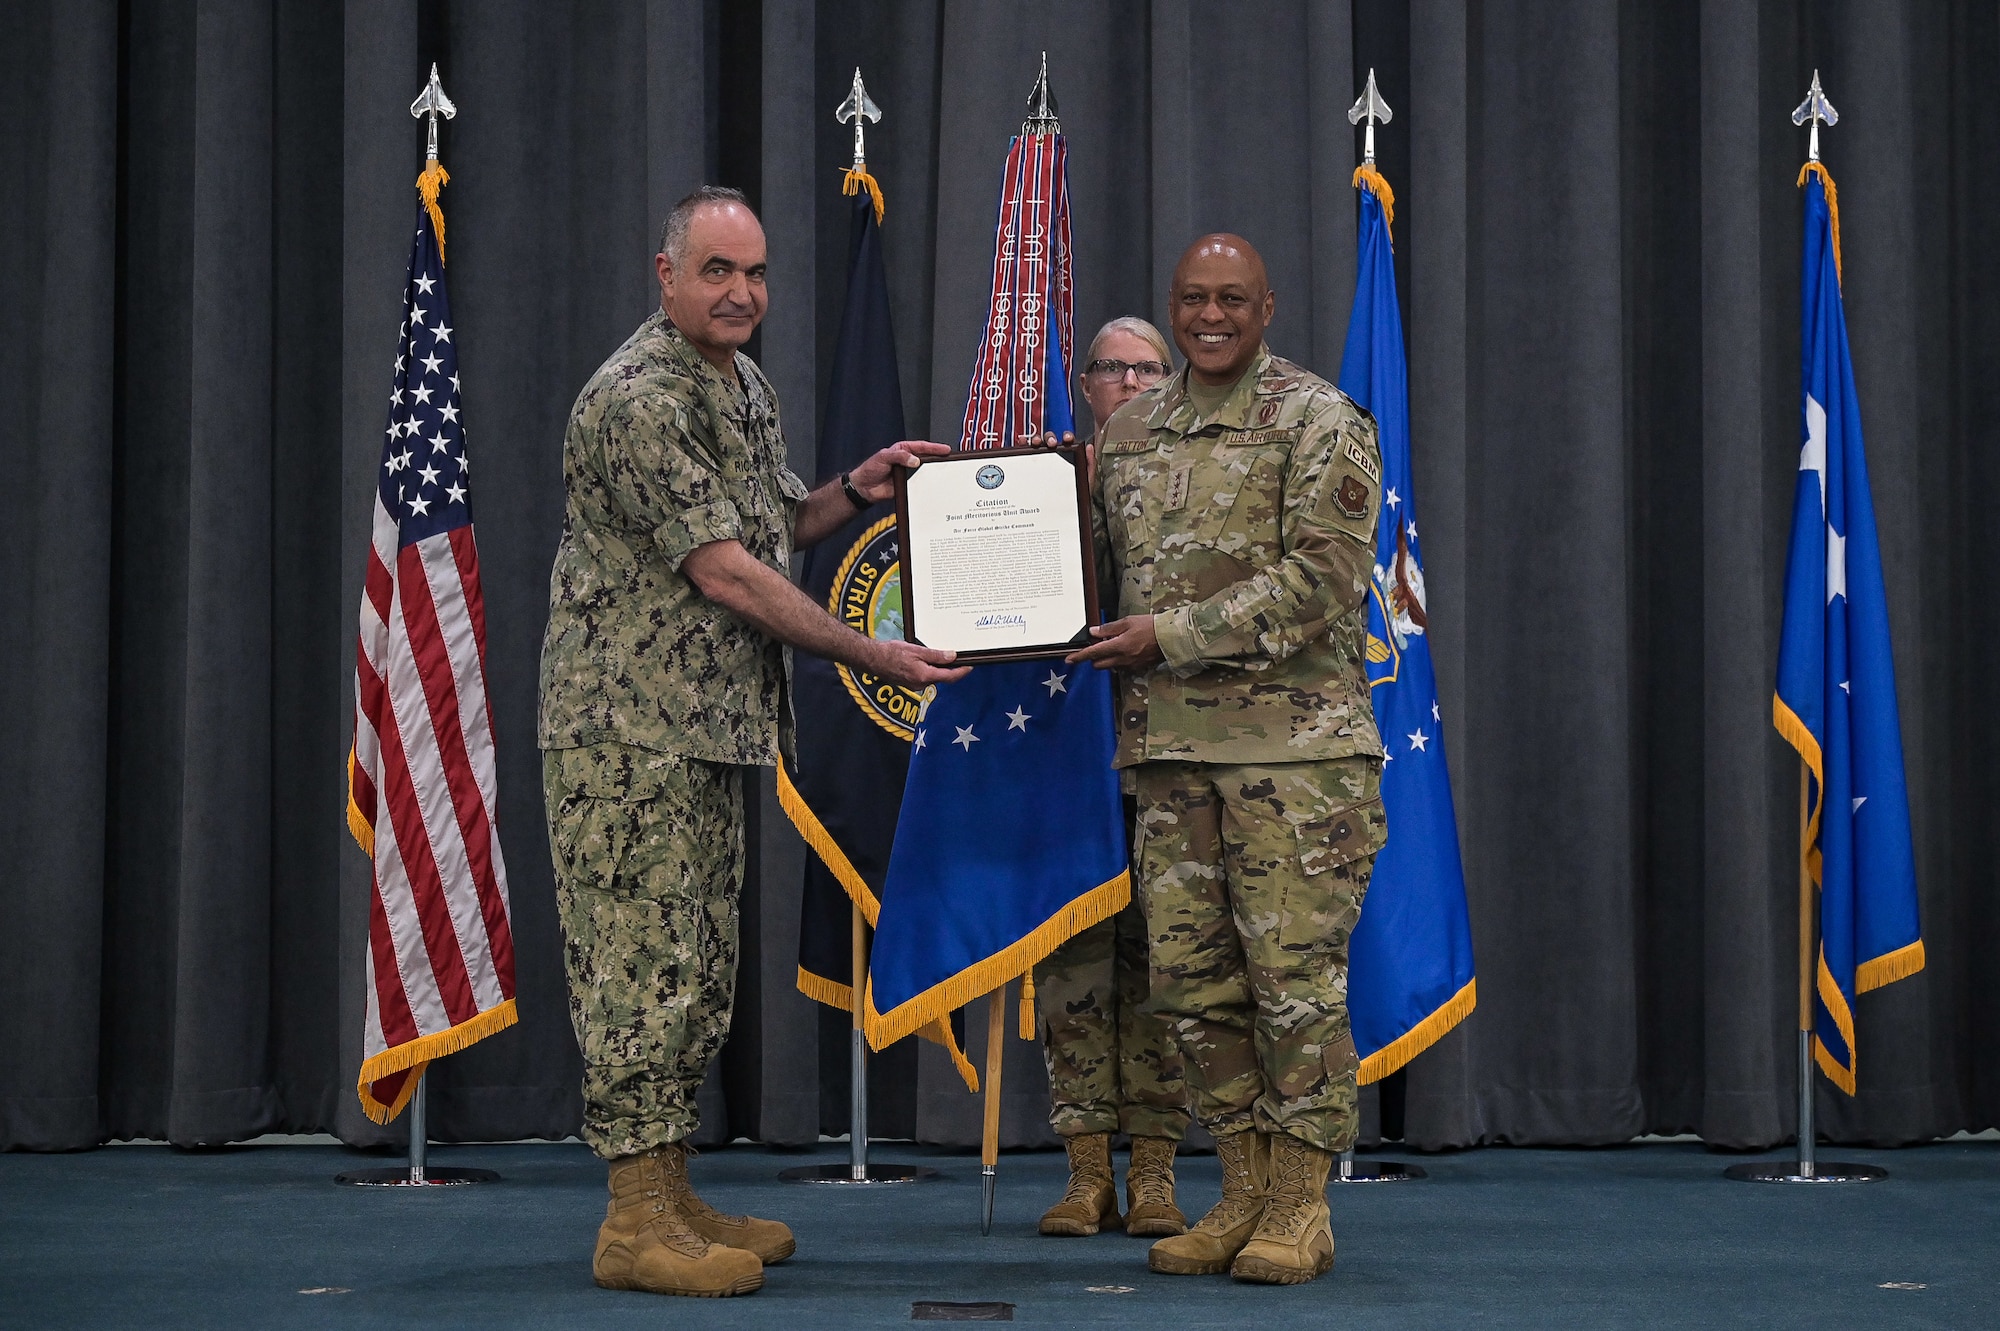 Adm. Charles A. Richard, commander, U.S. Strategic Command, presented the Joint Meritorious Unit Award to Air Force Global Strike Command during a ceremony held at Barksdale Air Force Base, Louisiana, May 18.